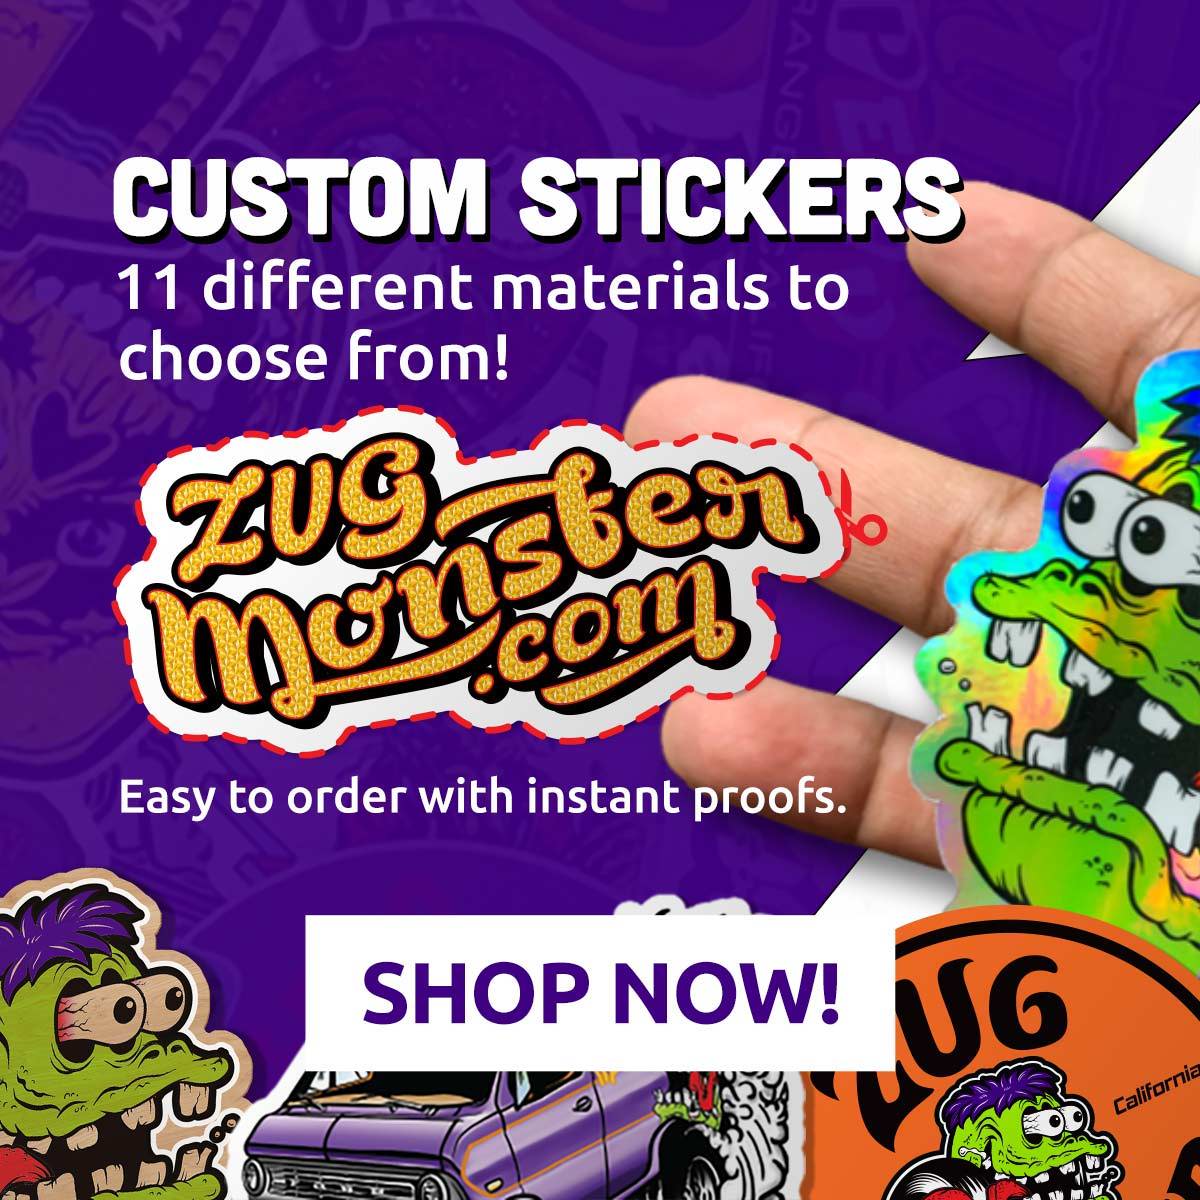 Custom diecut stickers. 11 Different materials to choose from! Easy to order with instant proofs. Shop custom stickers now.